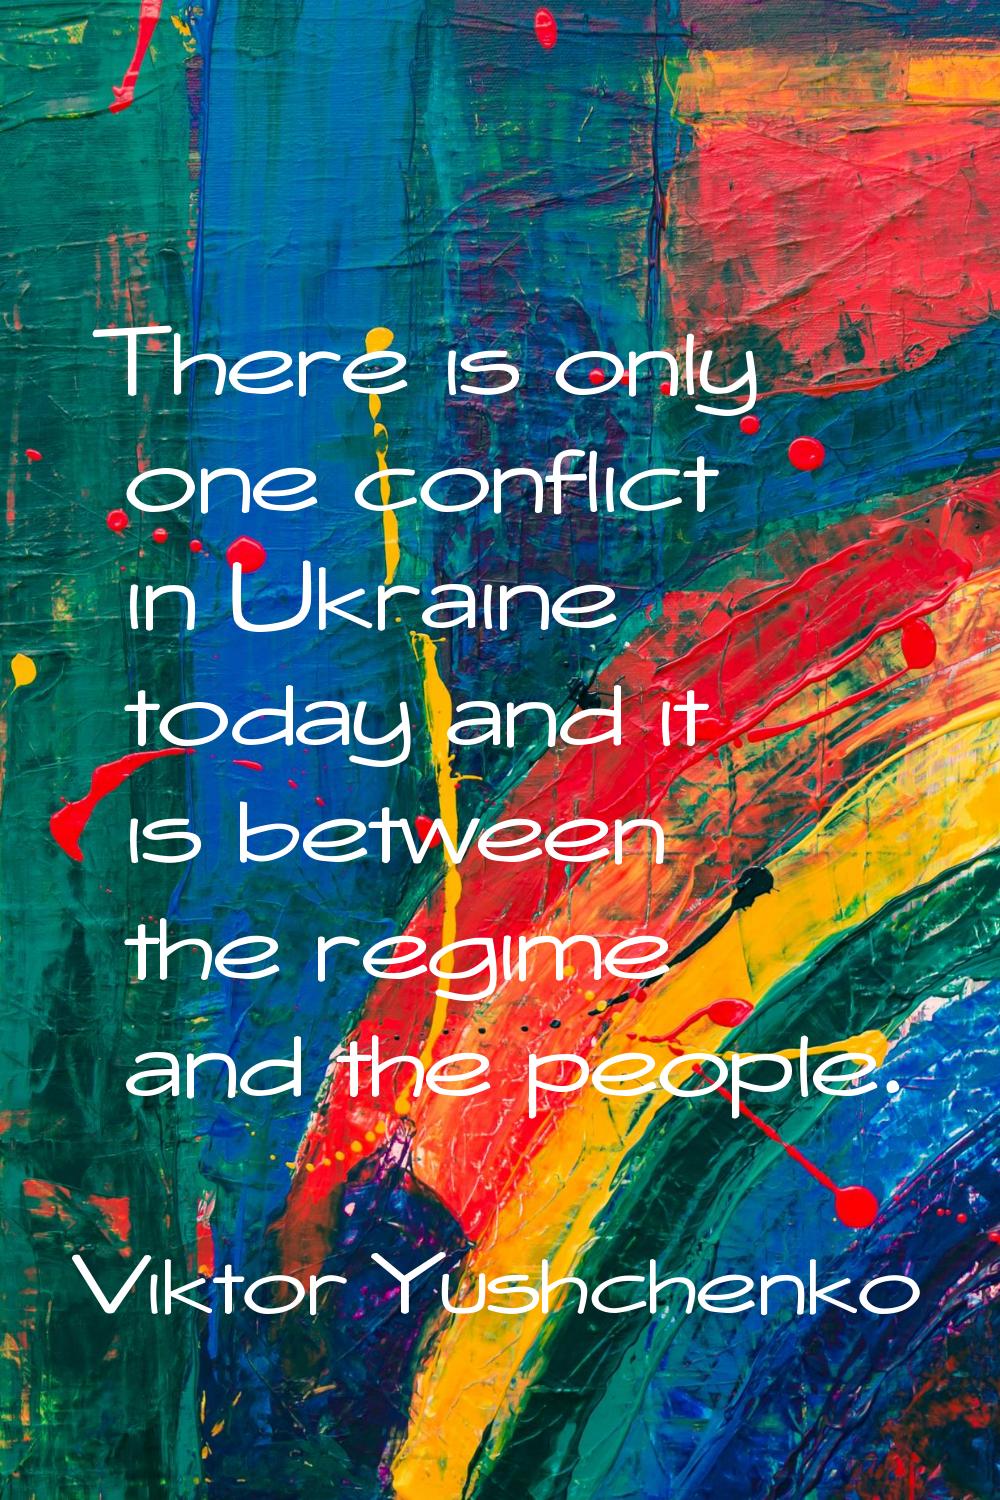 There is only one conflict in Ukraine today and it is between the regime and the people.